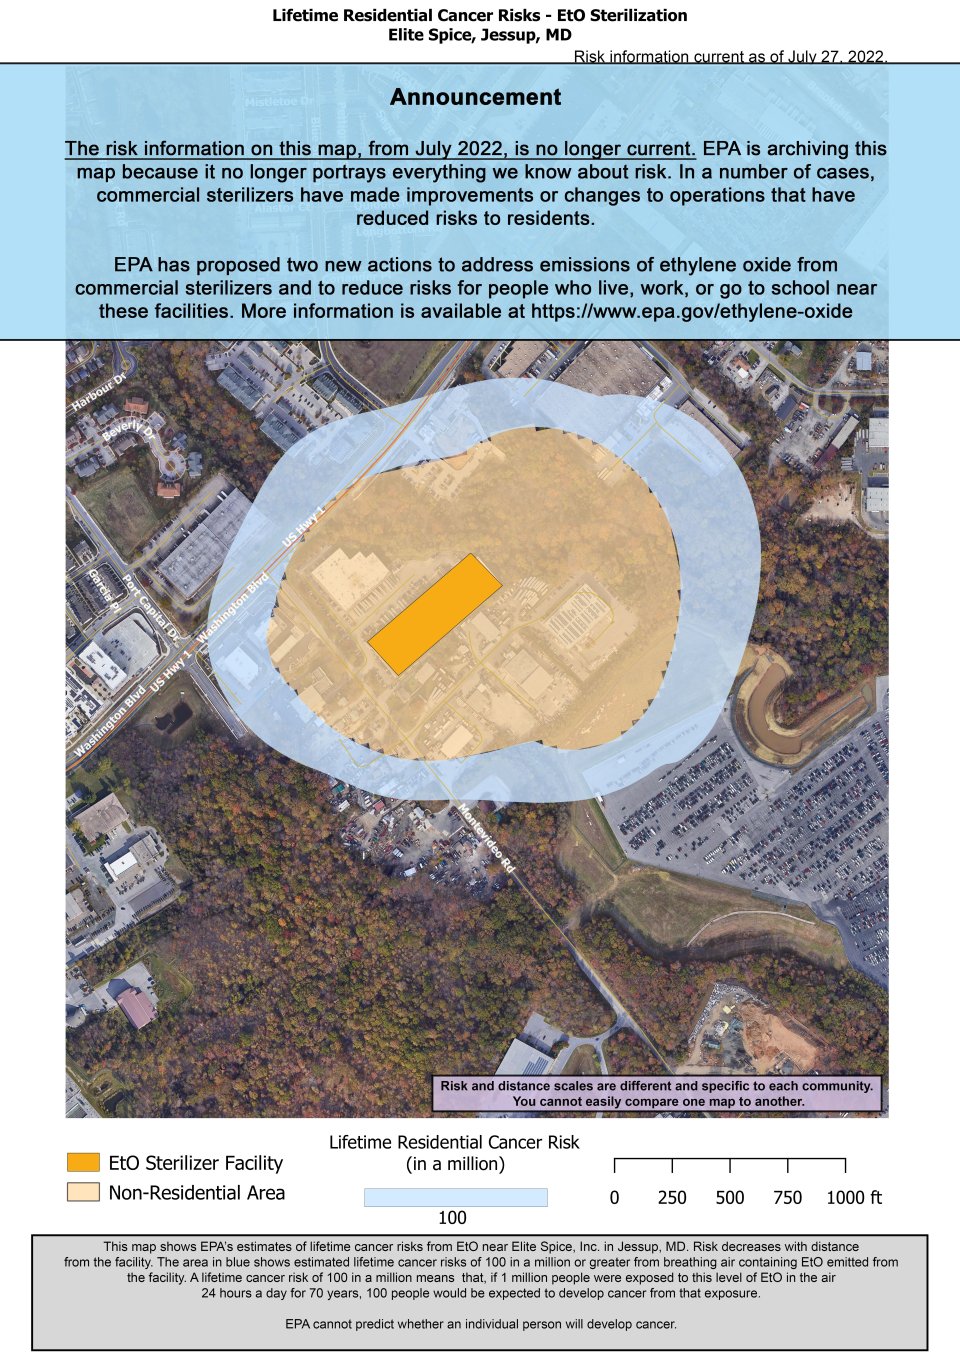 This map shows EPA’s estimated lifetime cancer risks from breathing ethylene oxide near Elite Spice, 7151 Montevideo Rd Jessup MD. Estimated cancer risk decreases with distance from the facility. Nearest the facility the estimated lifetime cancer risk is 100 in a million. 